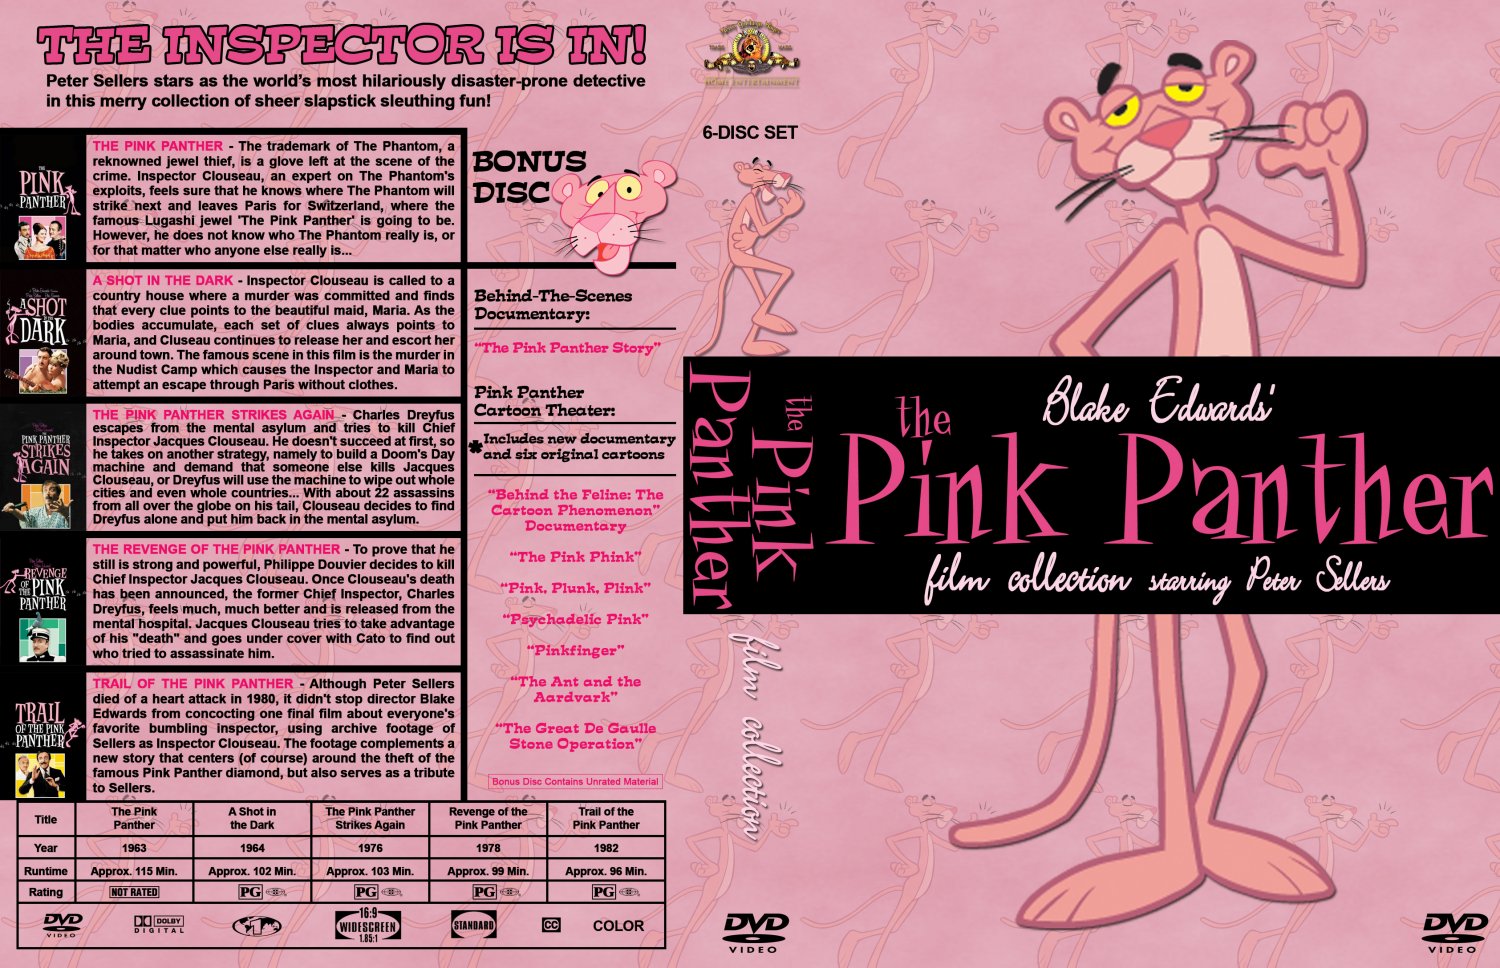 The Pink Panther Film Collection.